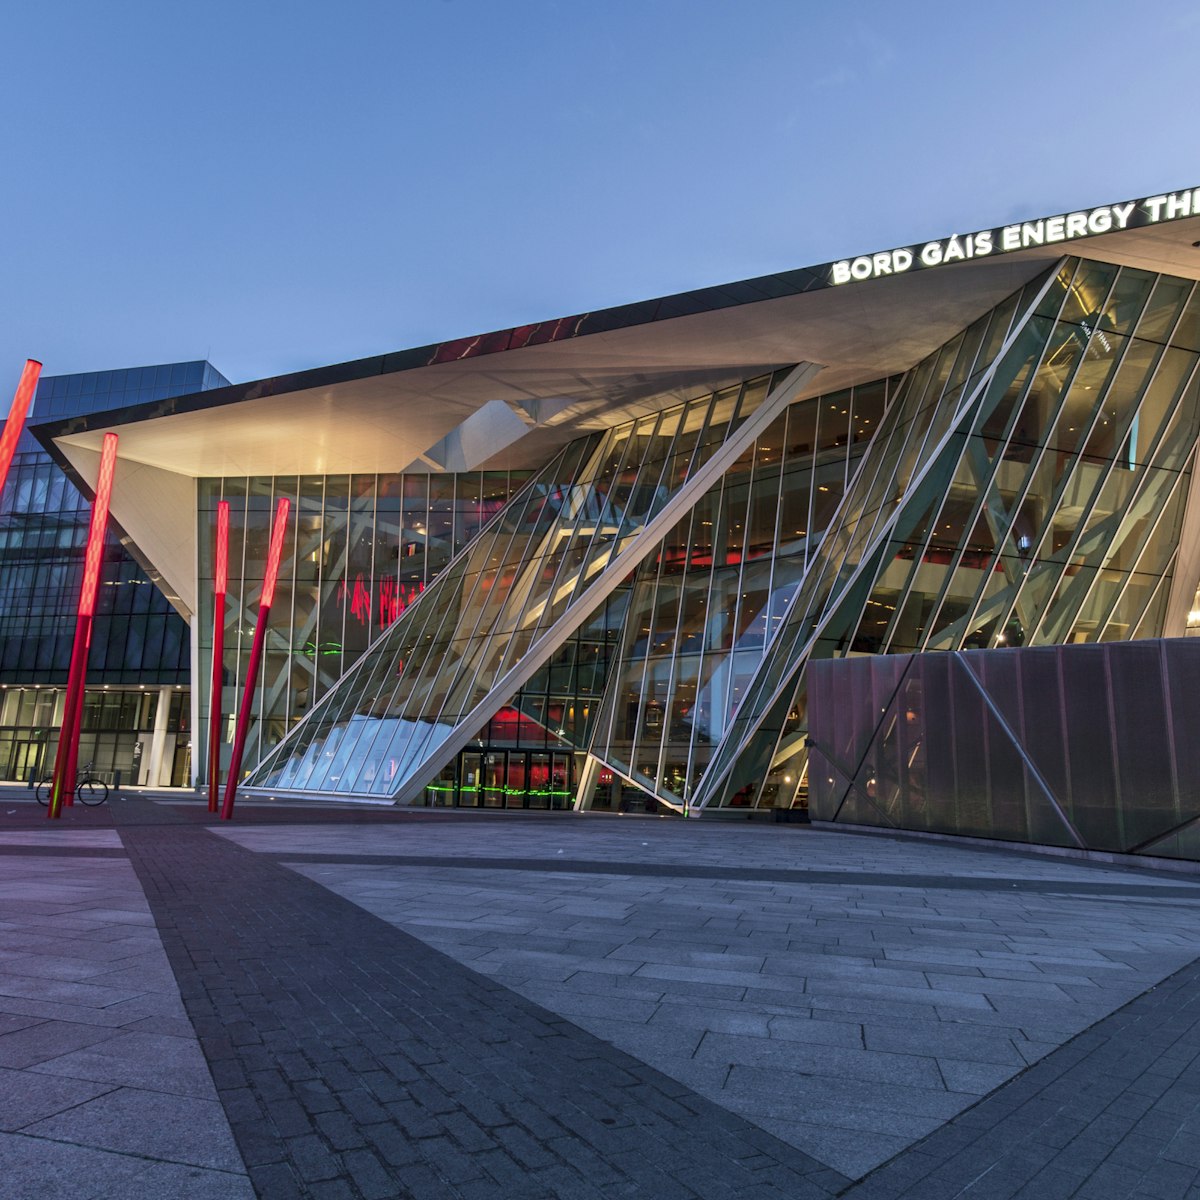 Also known as the Bord Gais Energy Theatre it was designed by Daniel Libeskind.